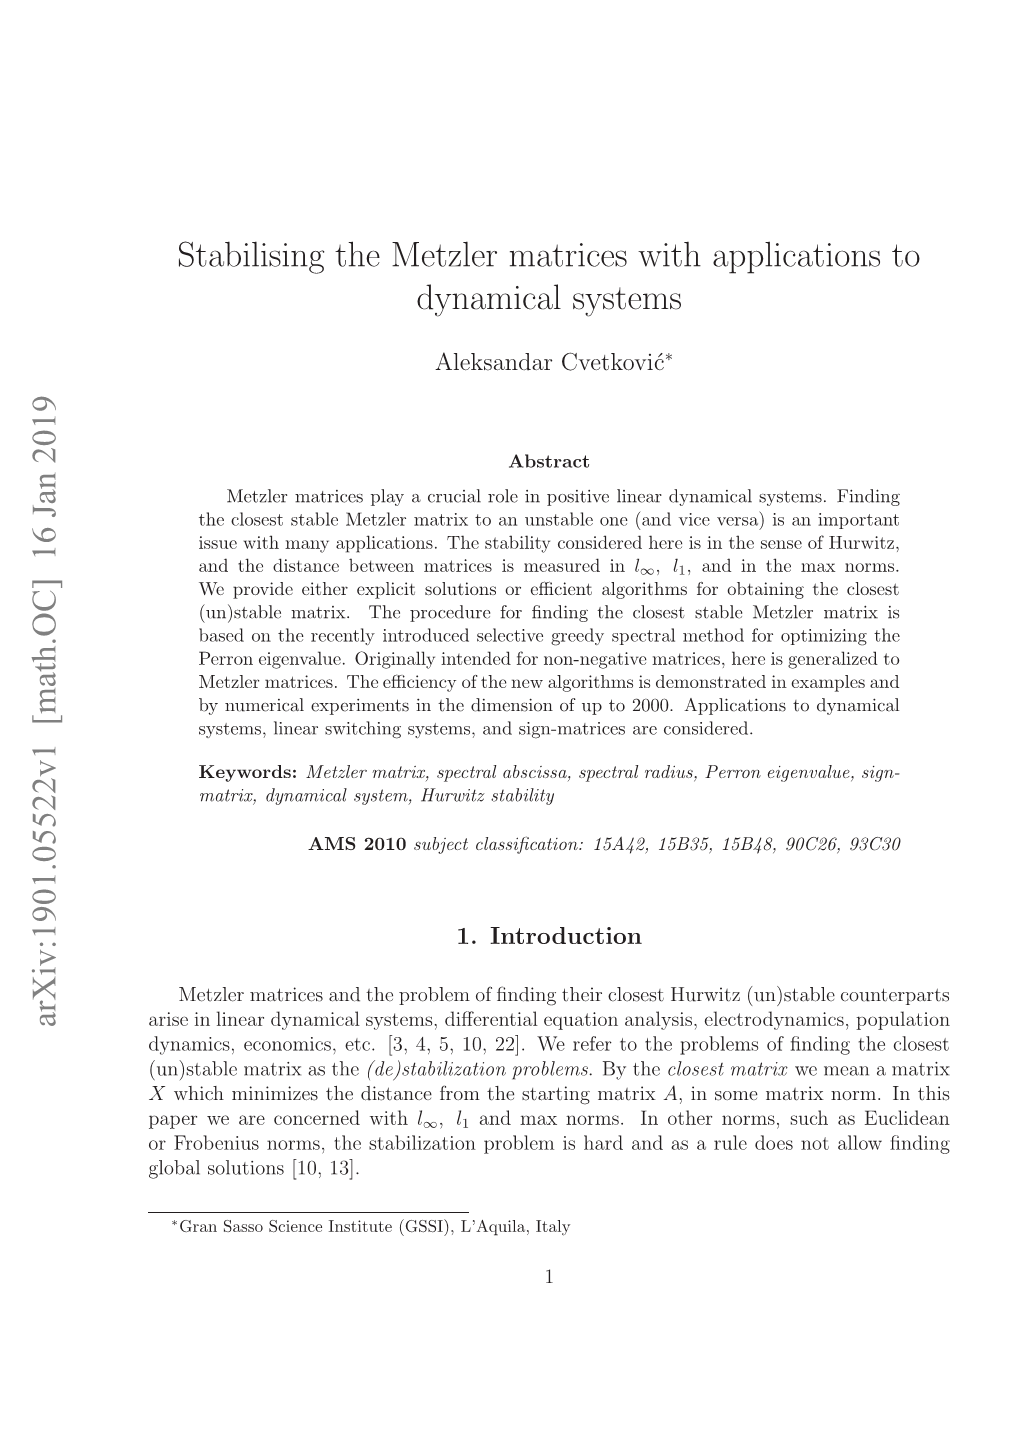 Stabilising the Metzler Matrices with Applications to Dynamical Systems